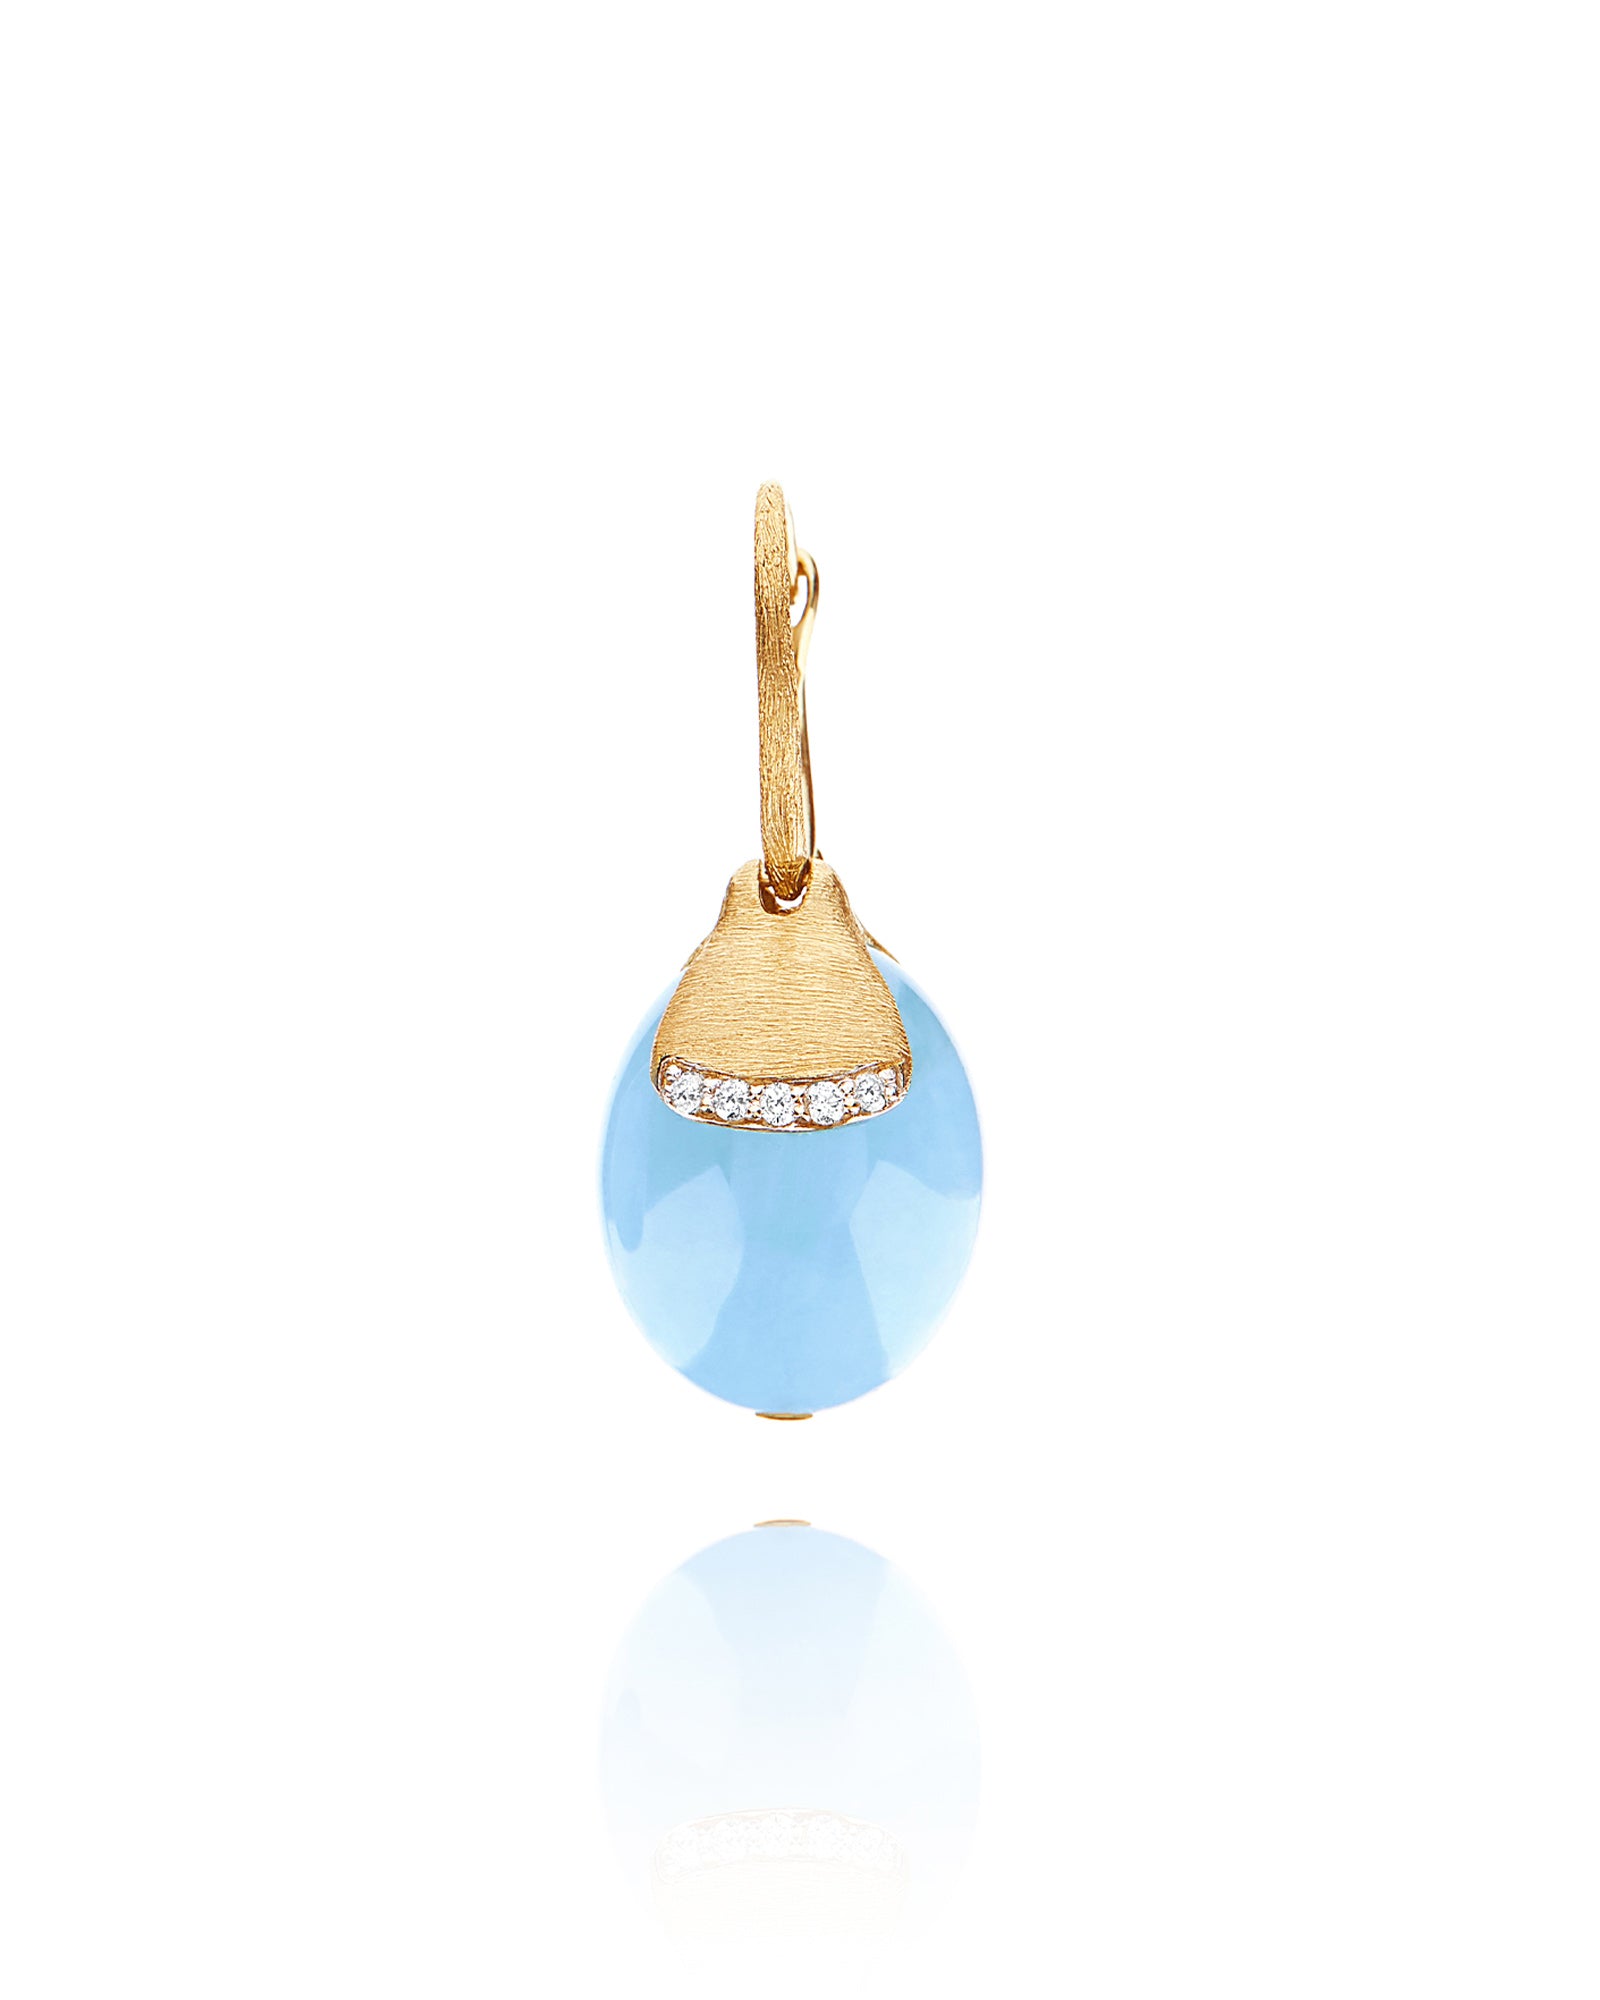 Azure "Amulets" Ciliegina Gold and Milky Aquamarine Ball Drop Single Earring with Diamonds Details (LARGE)